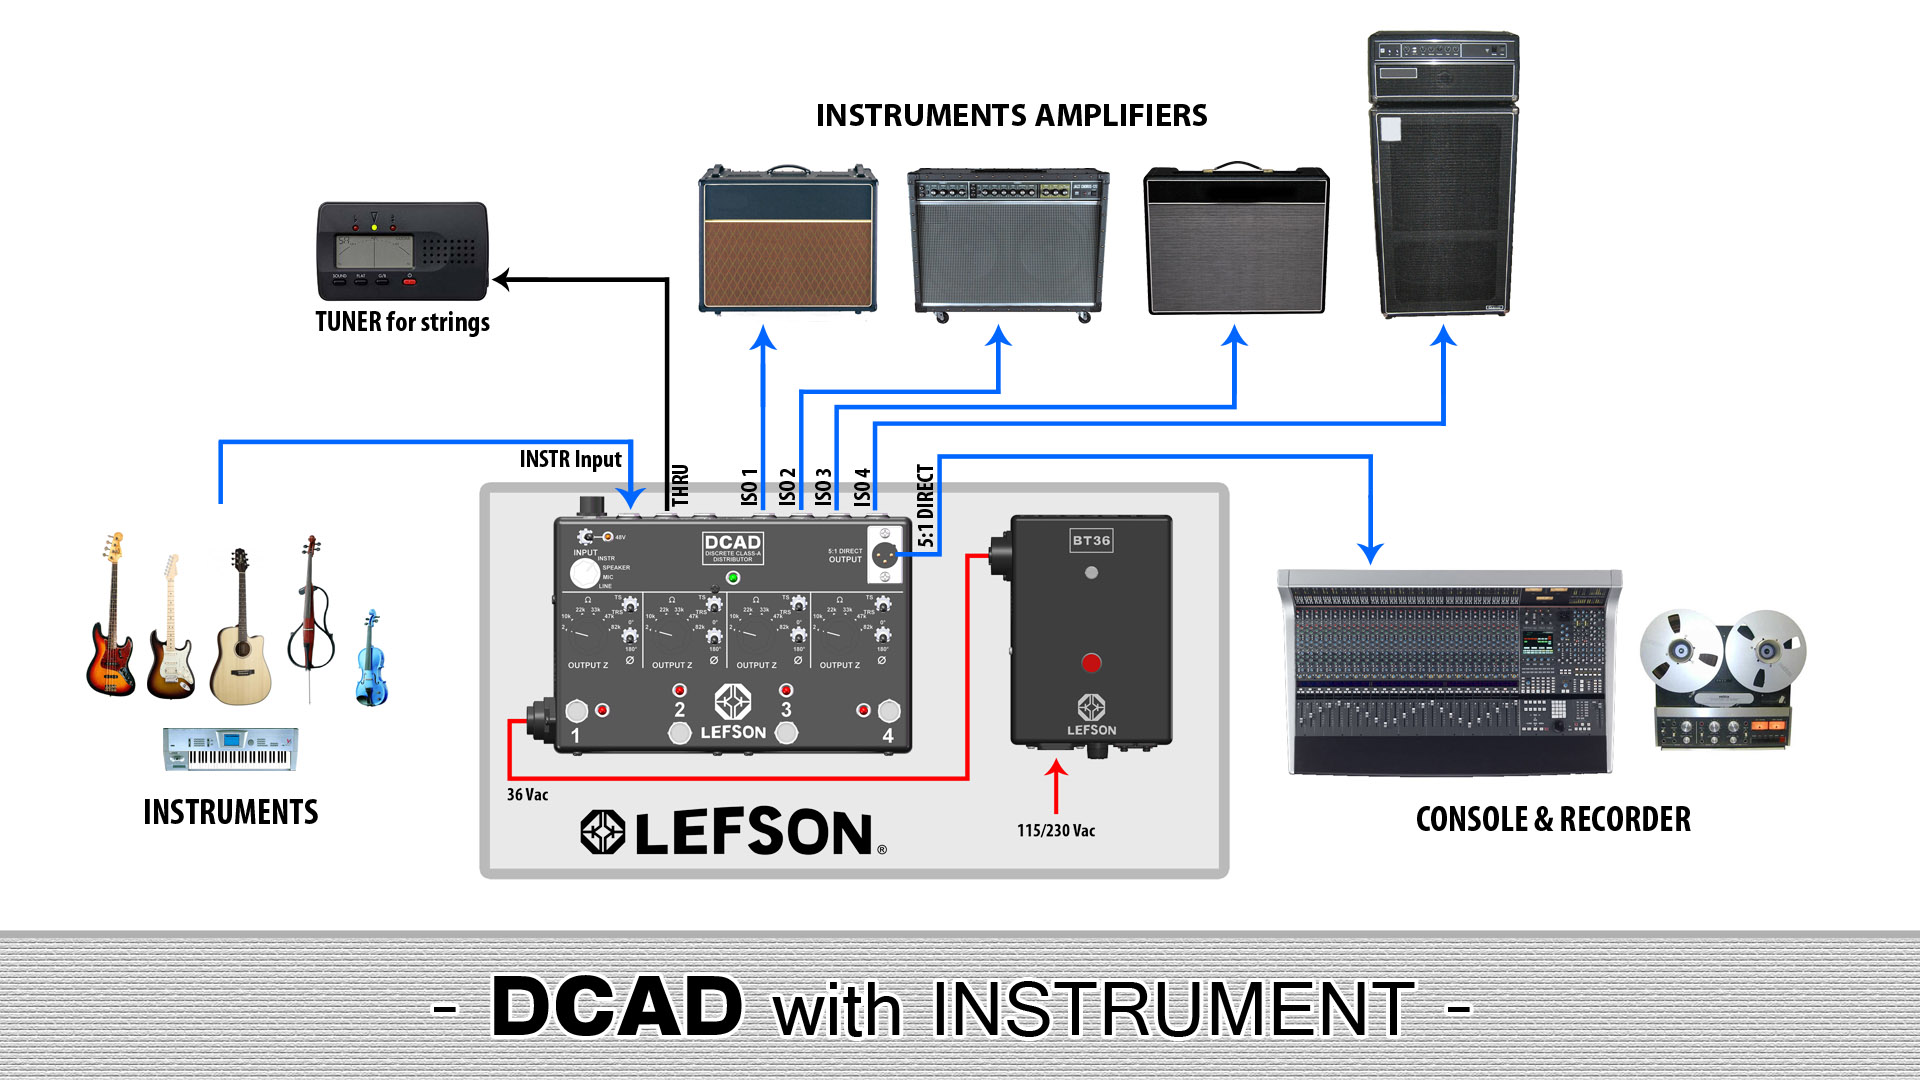 Picture of the DCAD with instrument